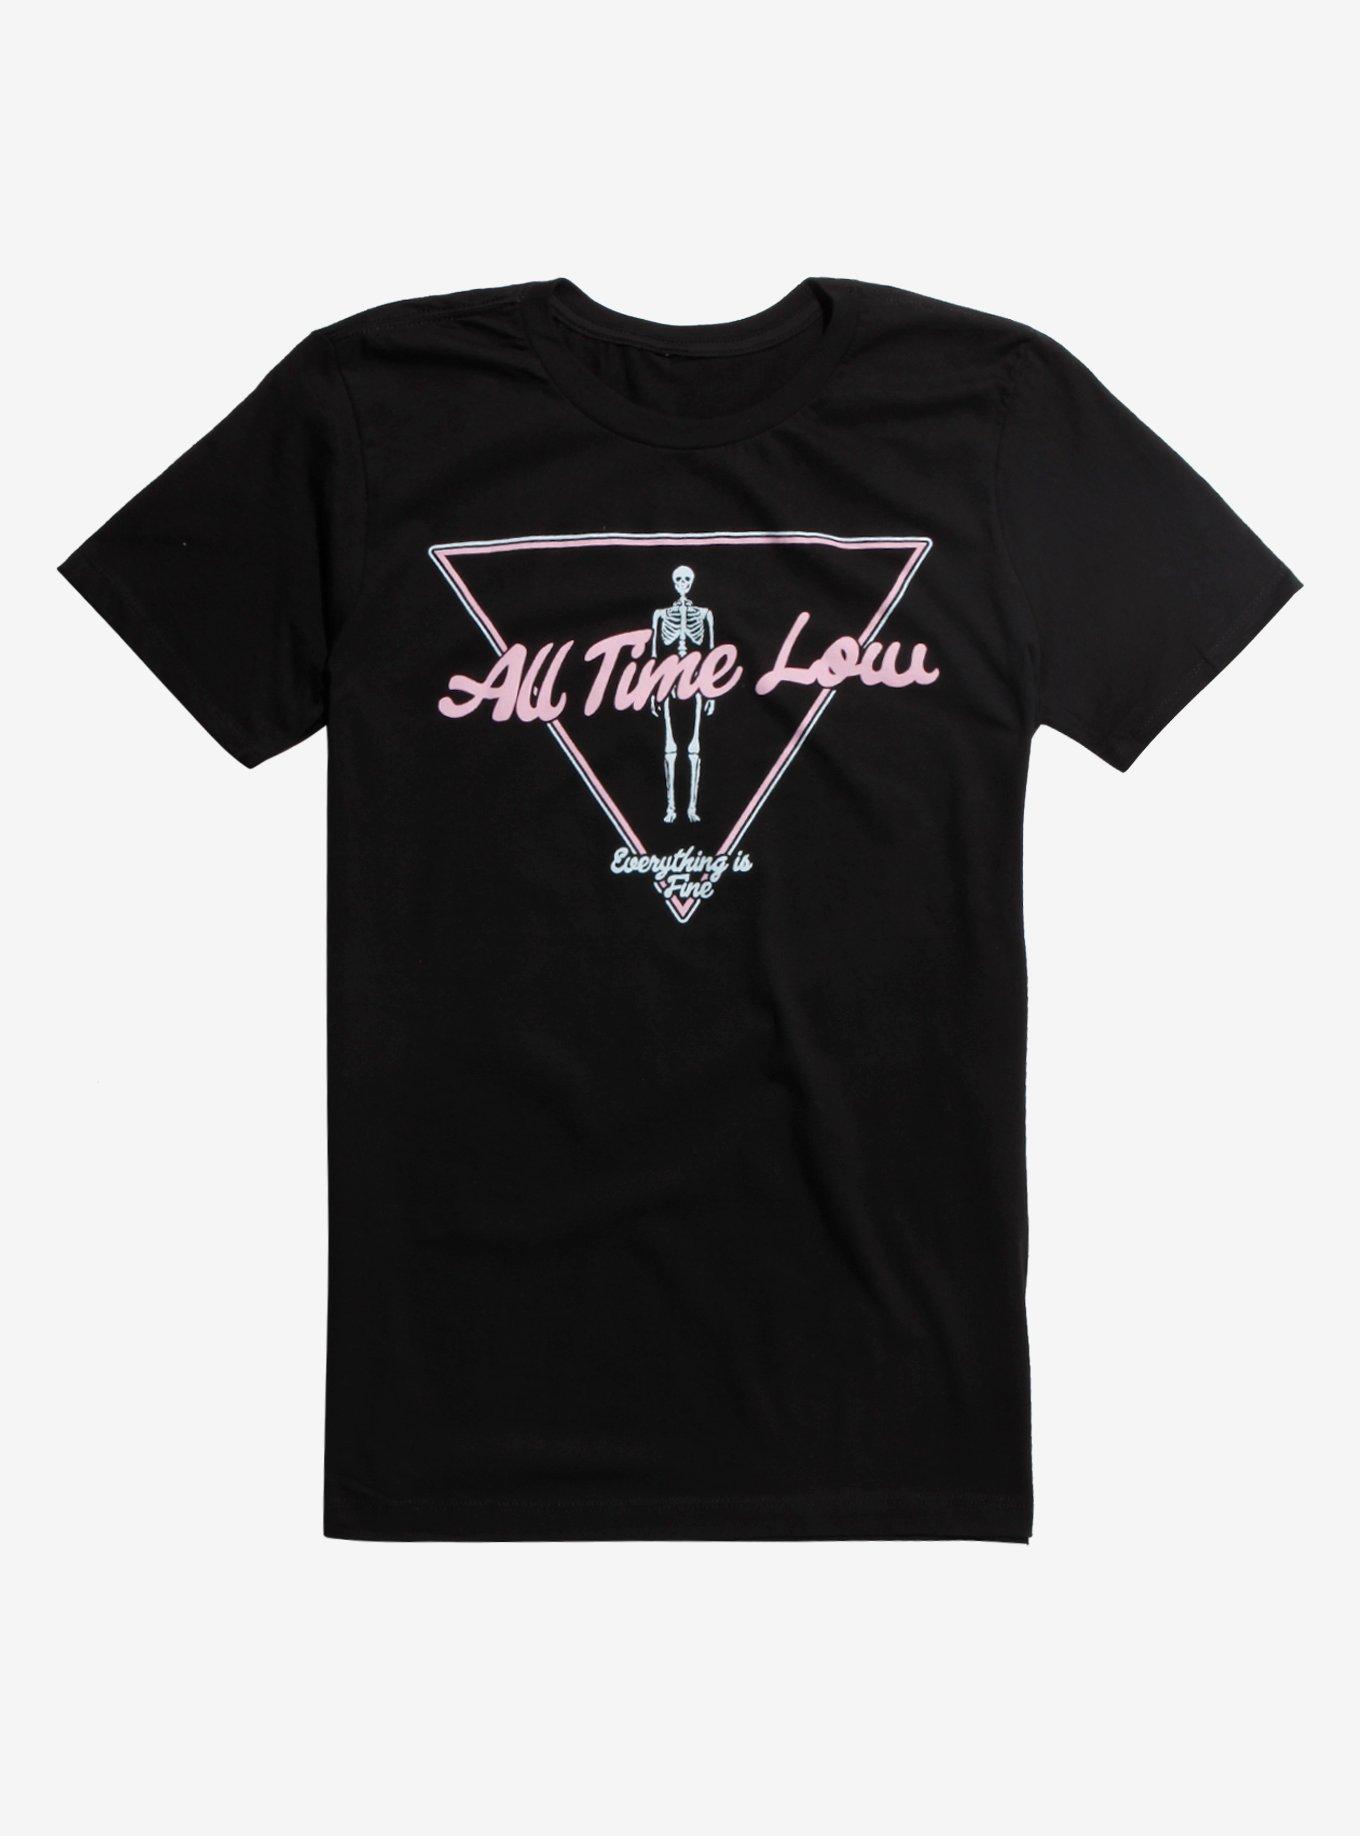 All Time Low Everything Is Fine T-Shirt, BLACK, hi-res